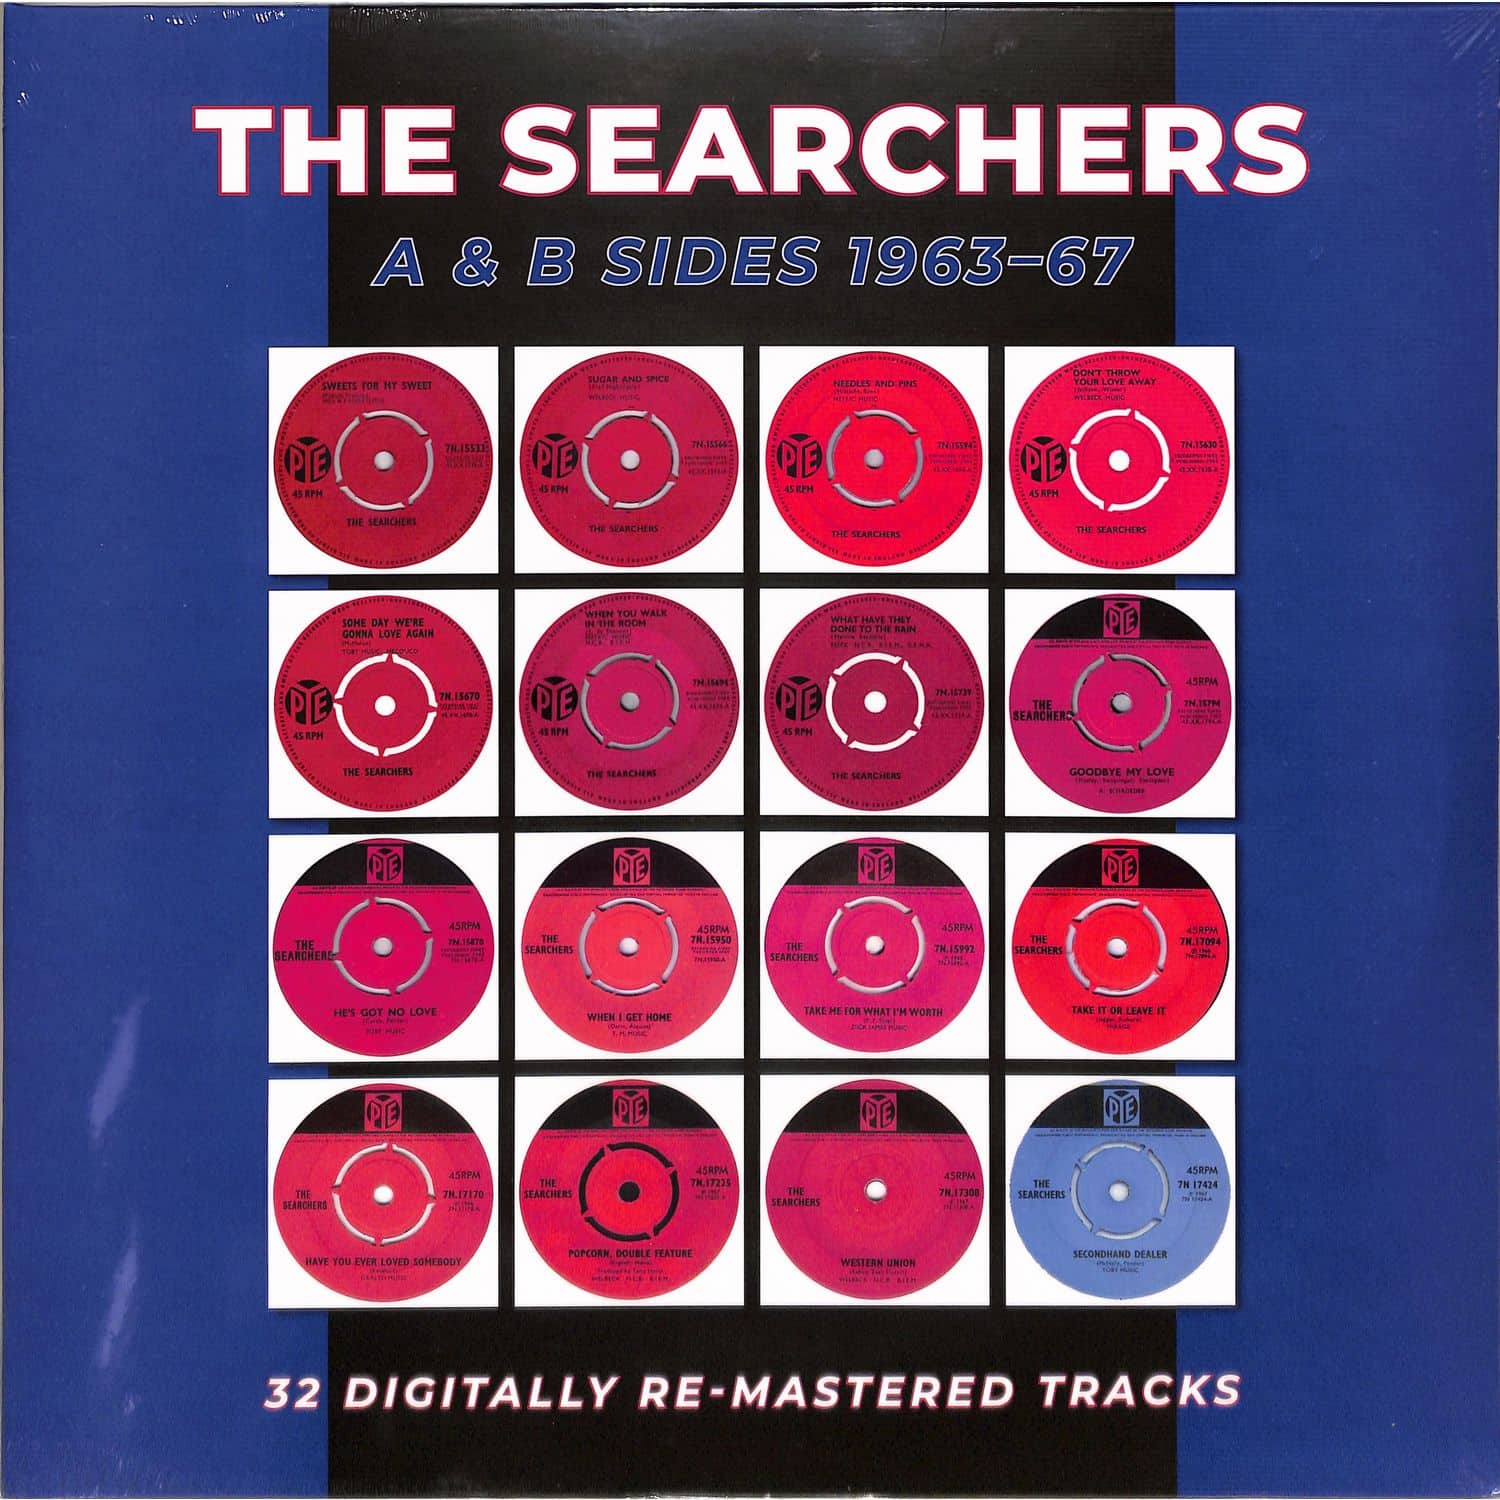 The Searchers - A&B SIDES 1963-67 